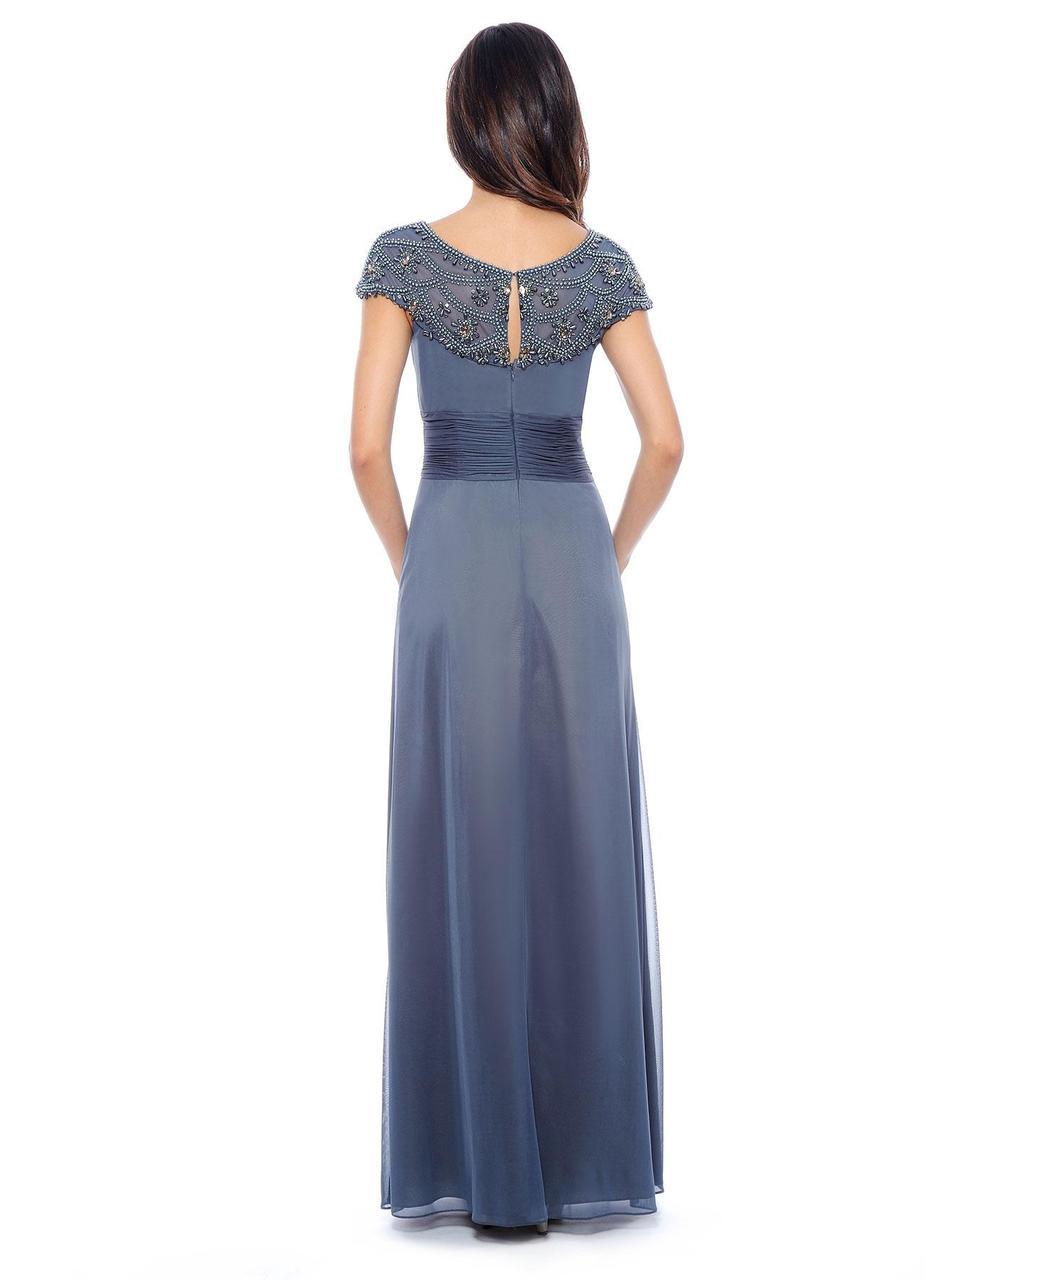 Decode 1.8 - Embellished Ruched Gown 182752SM in Gray